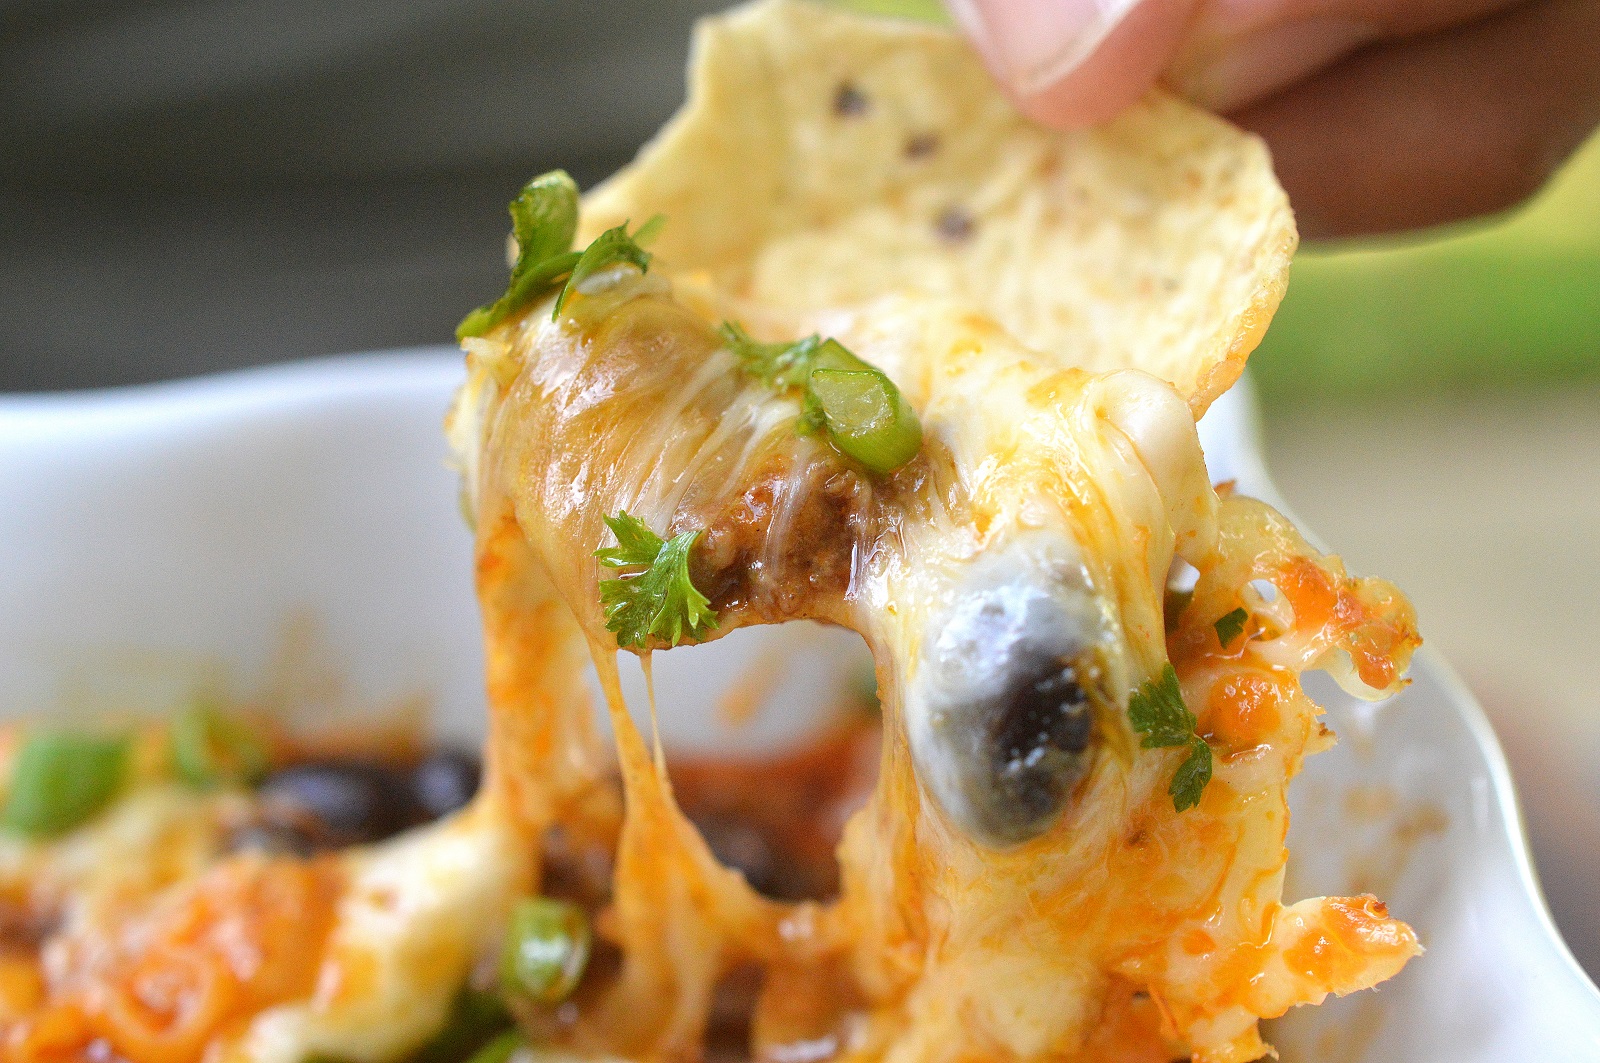 Cheesy Beef Enchilada Dip! Easy to make, gluten free and perfect for Game Day Grub!